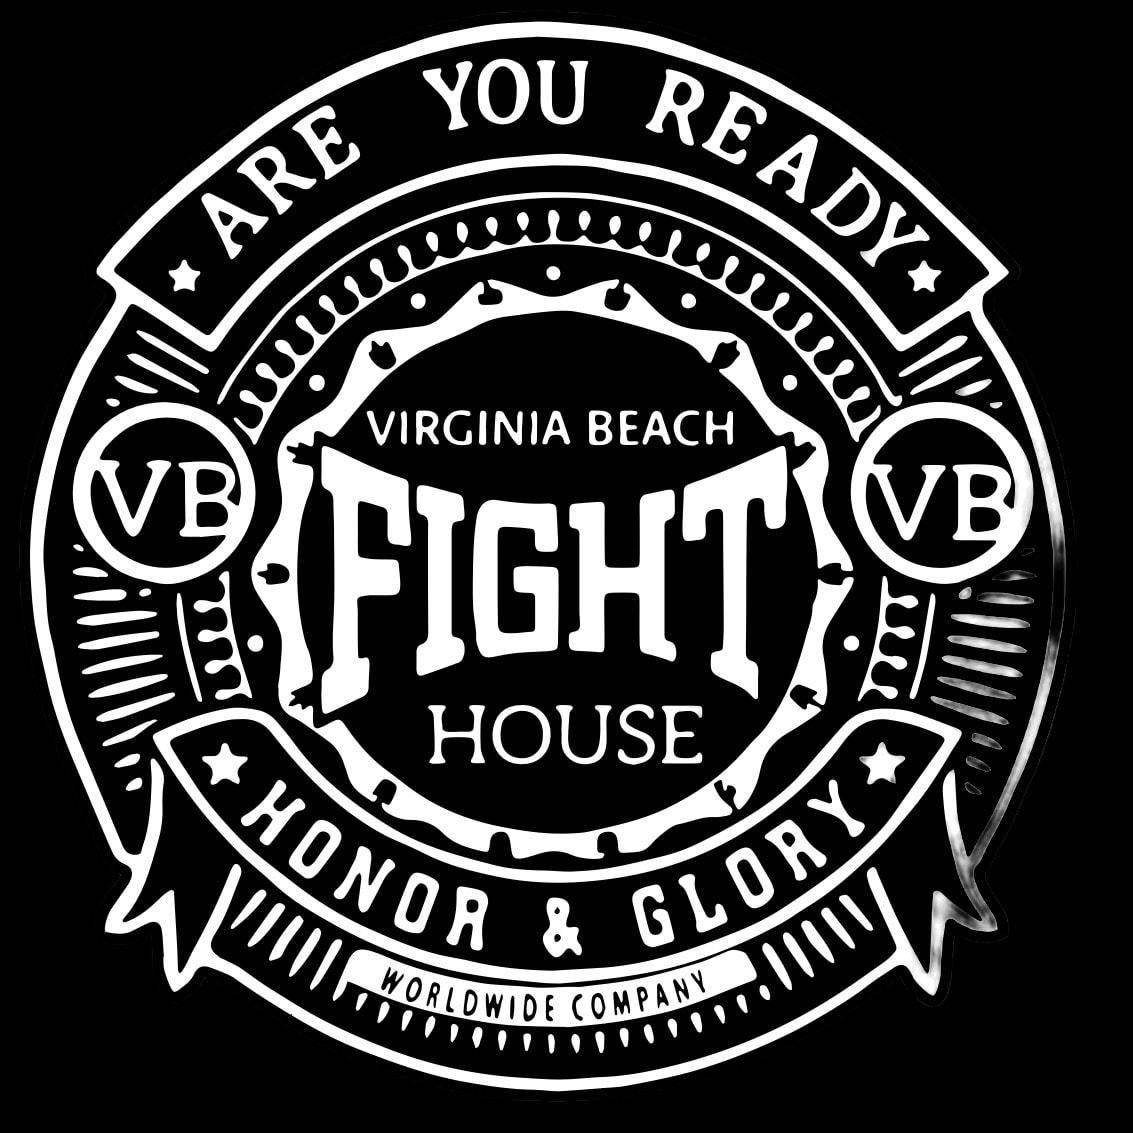 VB FIGHTHOUSE